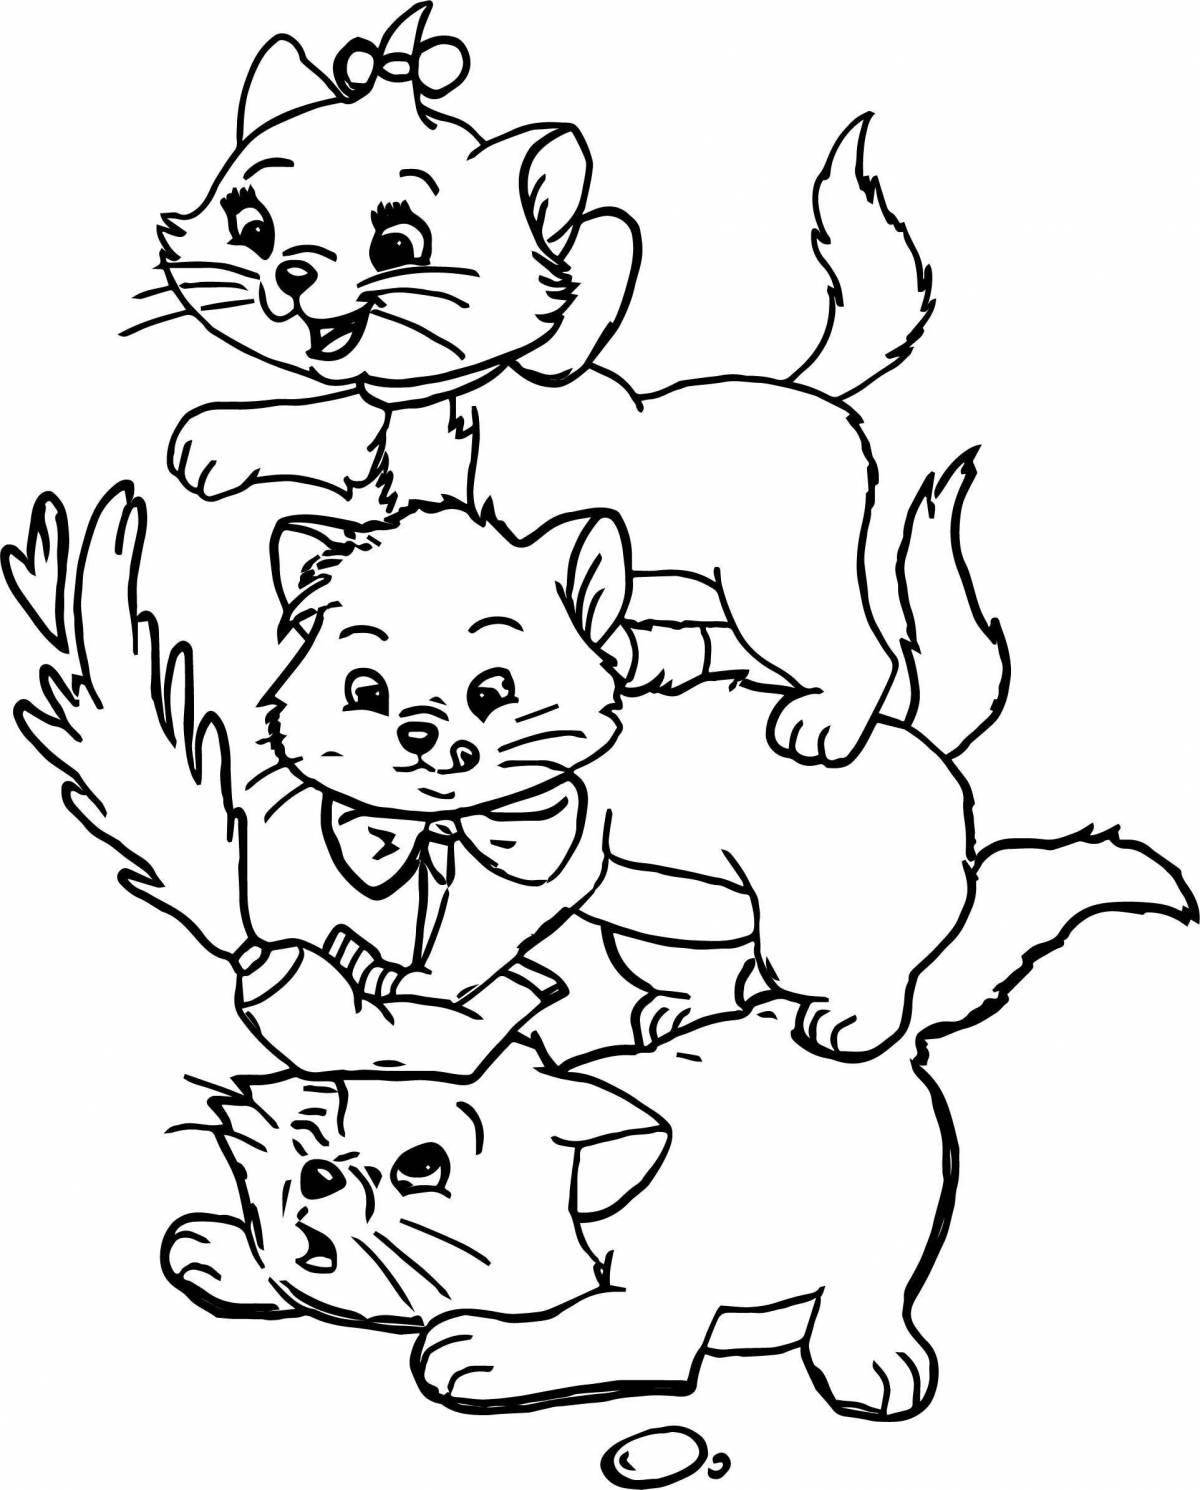 Fancy kitten and dog coloring